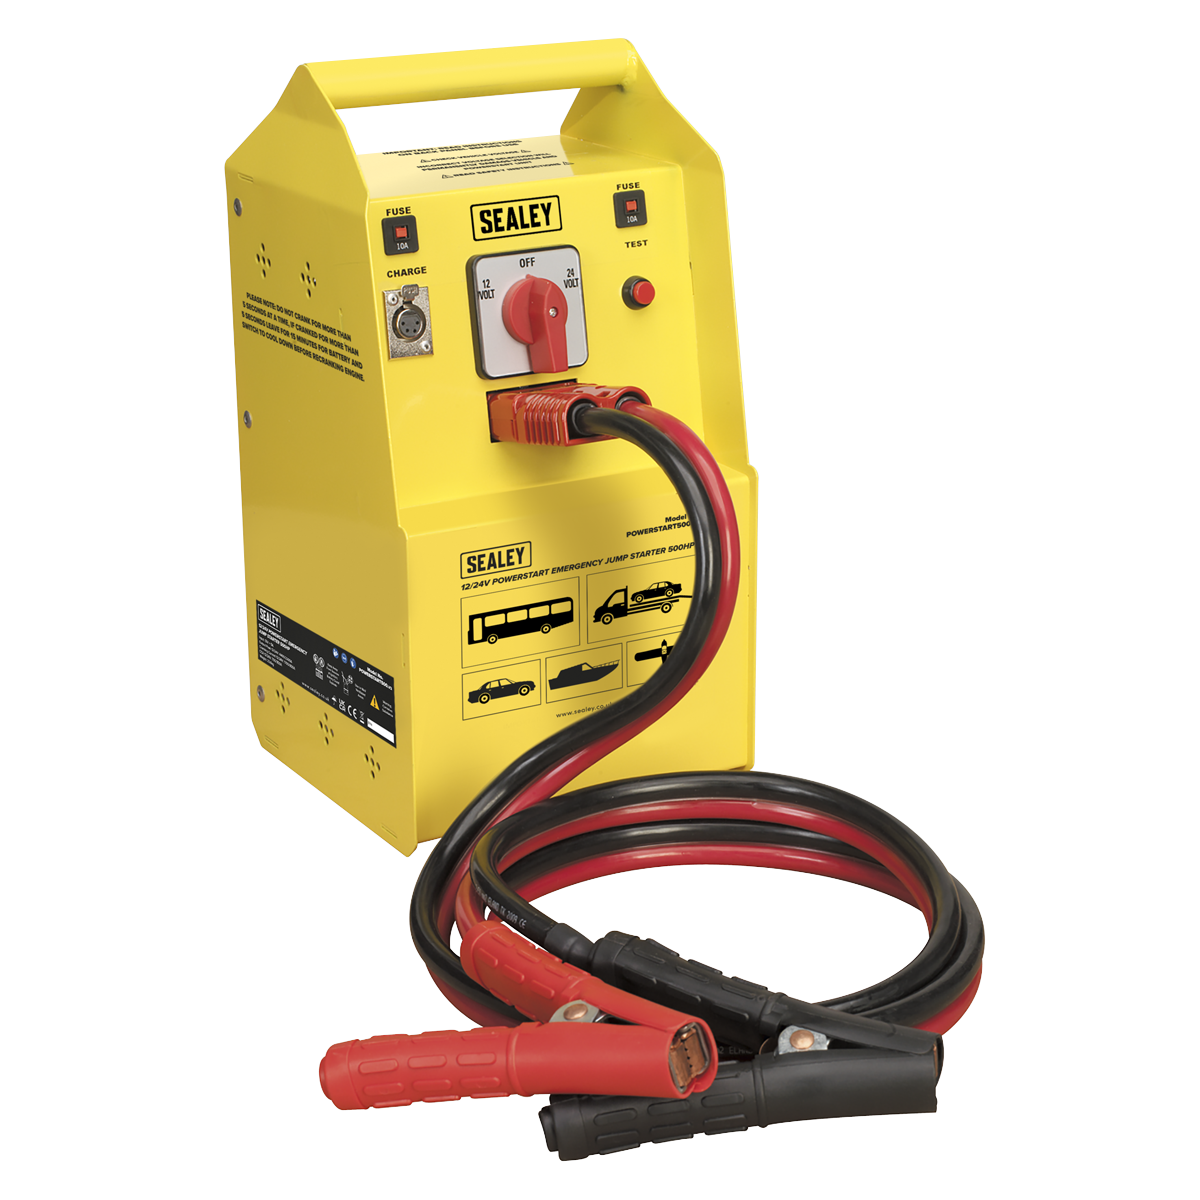 PowerStart Emergency Jump Starter 500hp Start 12/24V | Heavy-duty steel case, high power US manufactured battery and industrial quality switchgear make this model suitable for starting most vehicles. | toolforce.ie